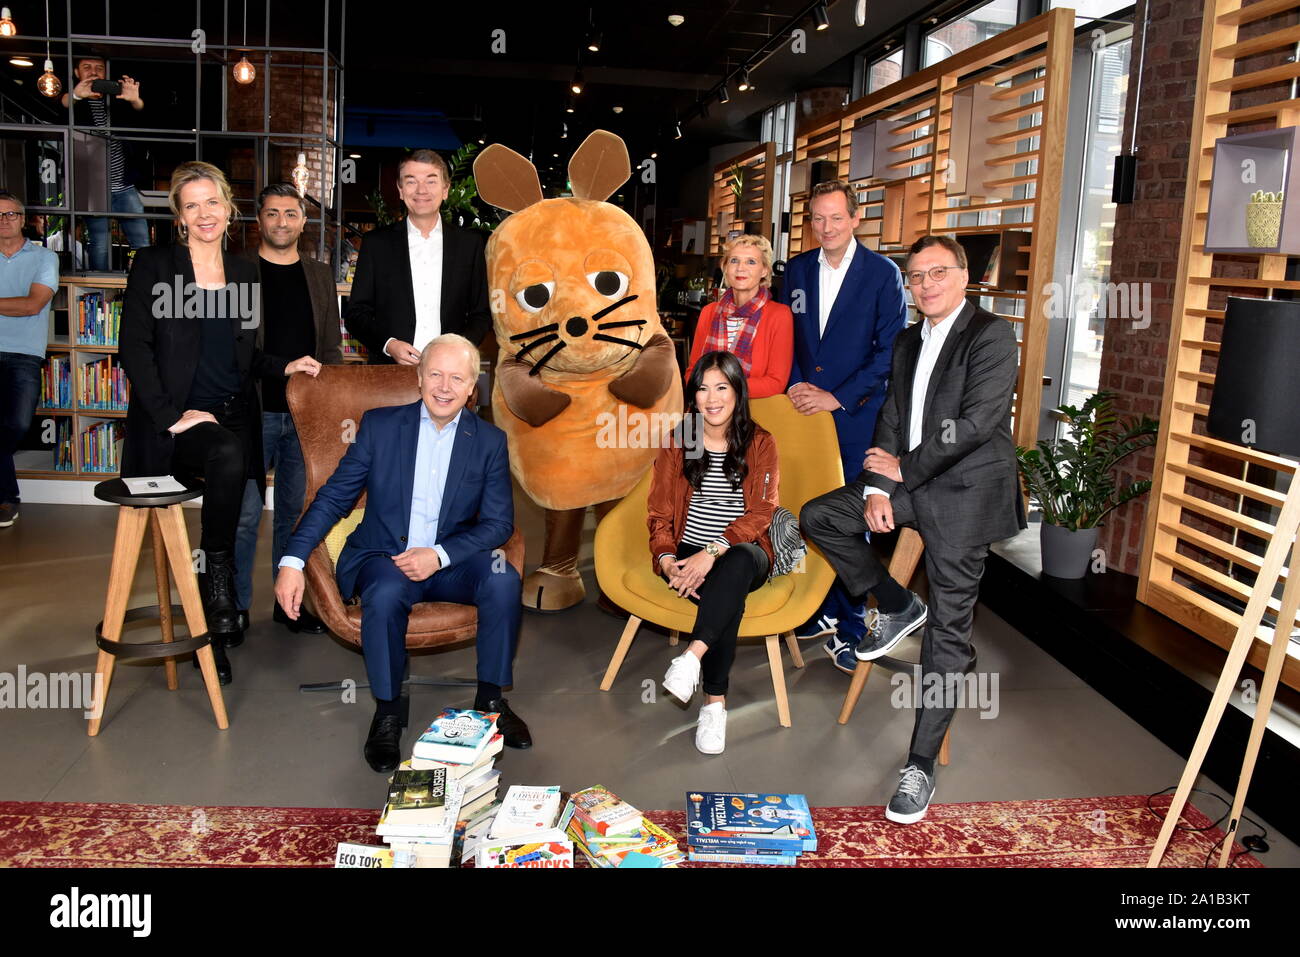 Cologne, Germany. 25th Sep, 2019. Valerie Weber, l-r, Suat Yilmaz, Tom Buhrow, Jörg Schönenborn, Maus, Mai Thi Nguyen-Kim, Eckart von Hirschhausen and Volker Herresposiert at the press conference for the ARD Theme Week 2019, which deals with 'Future Education' from 9 to 16 November. Credit: Horst Galuschka/dpa/Alamy Live News Stock Photo